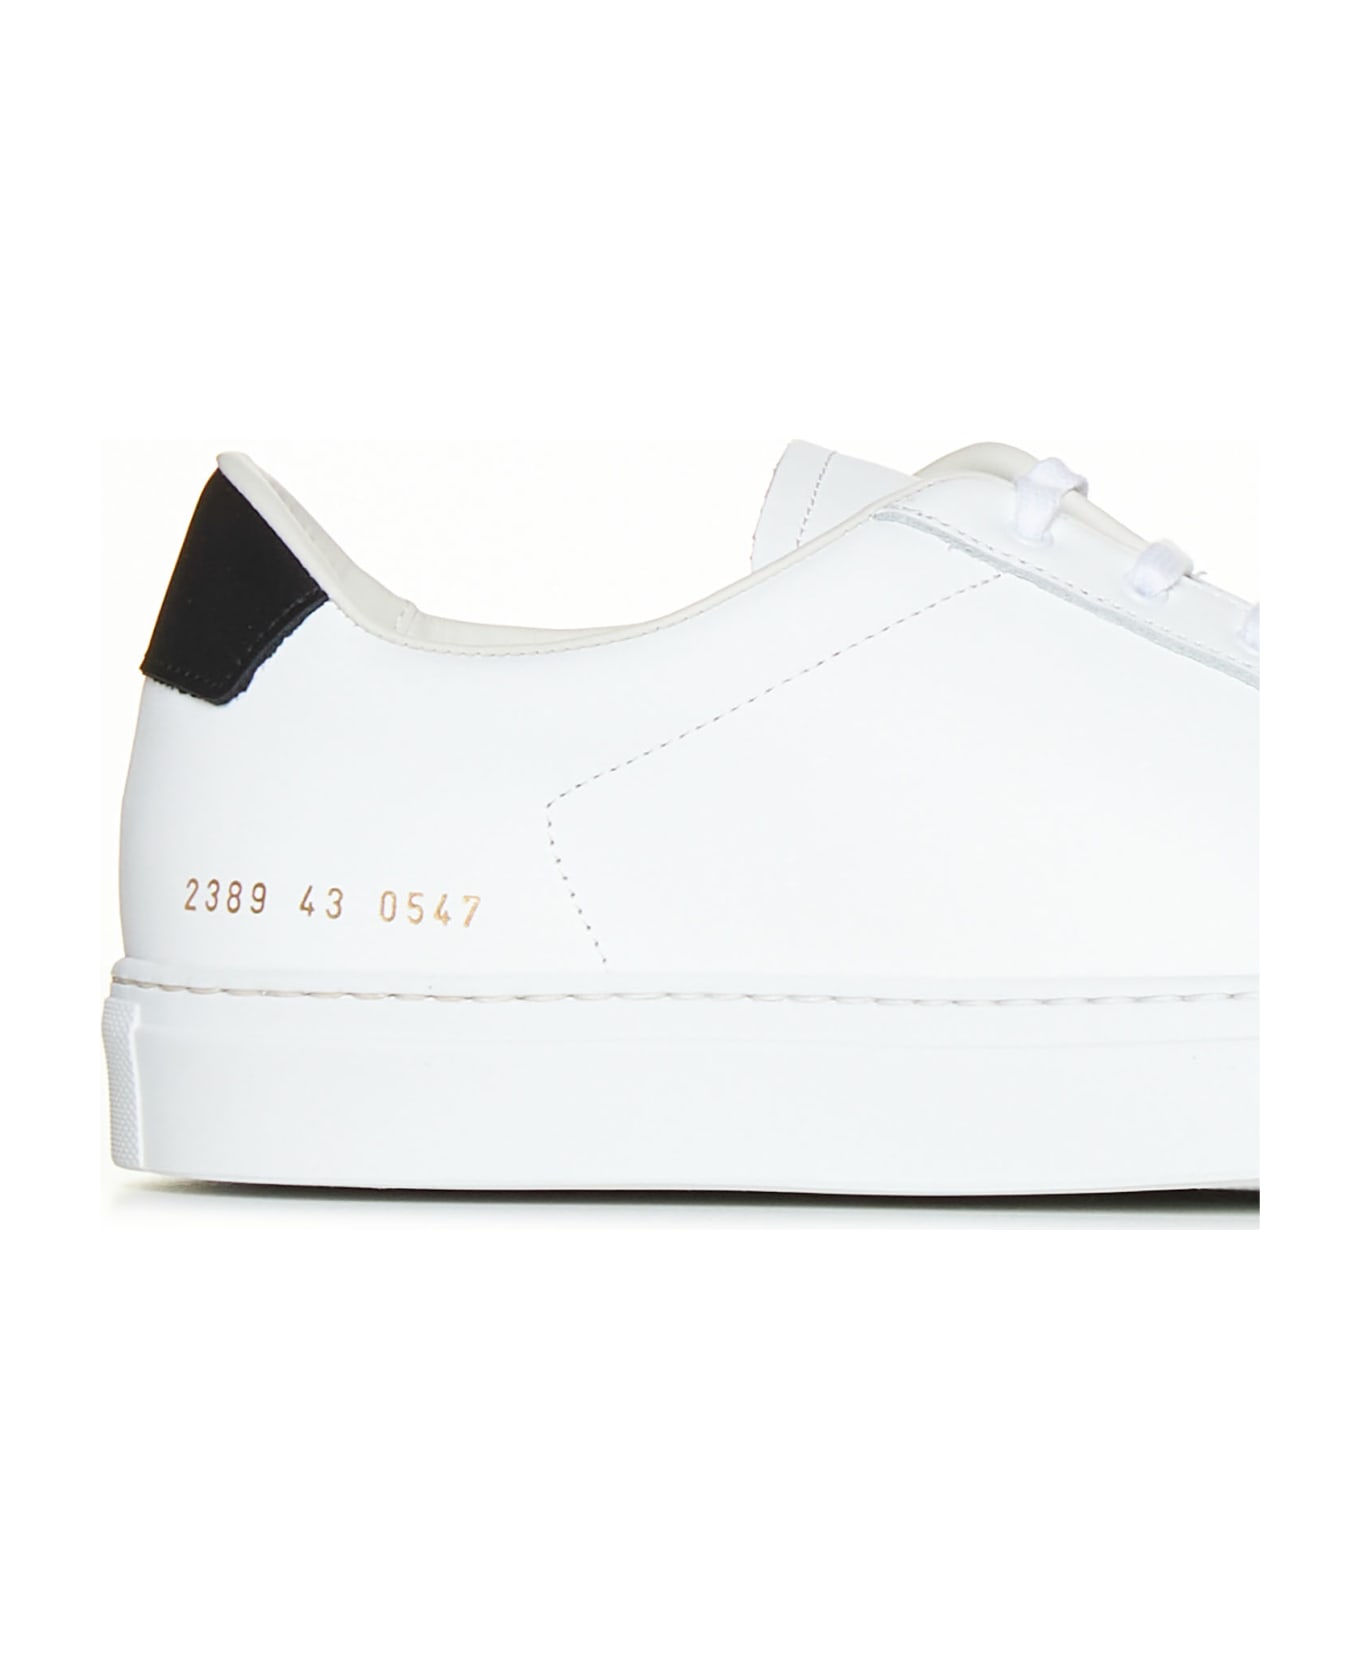 Common Projects White Leather Sneakers - White